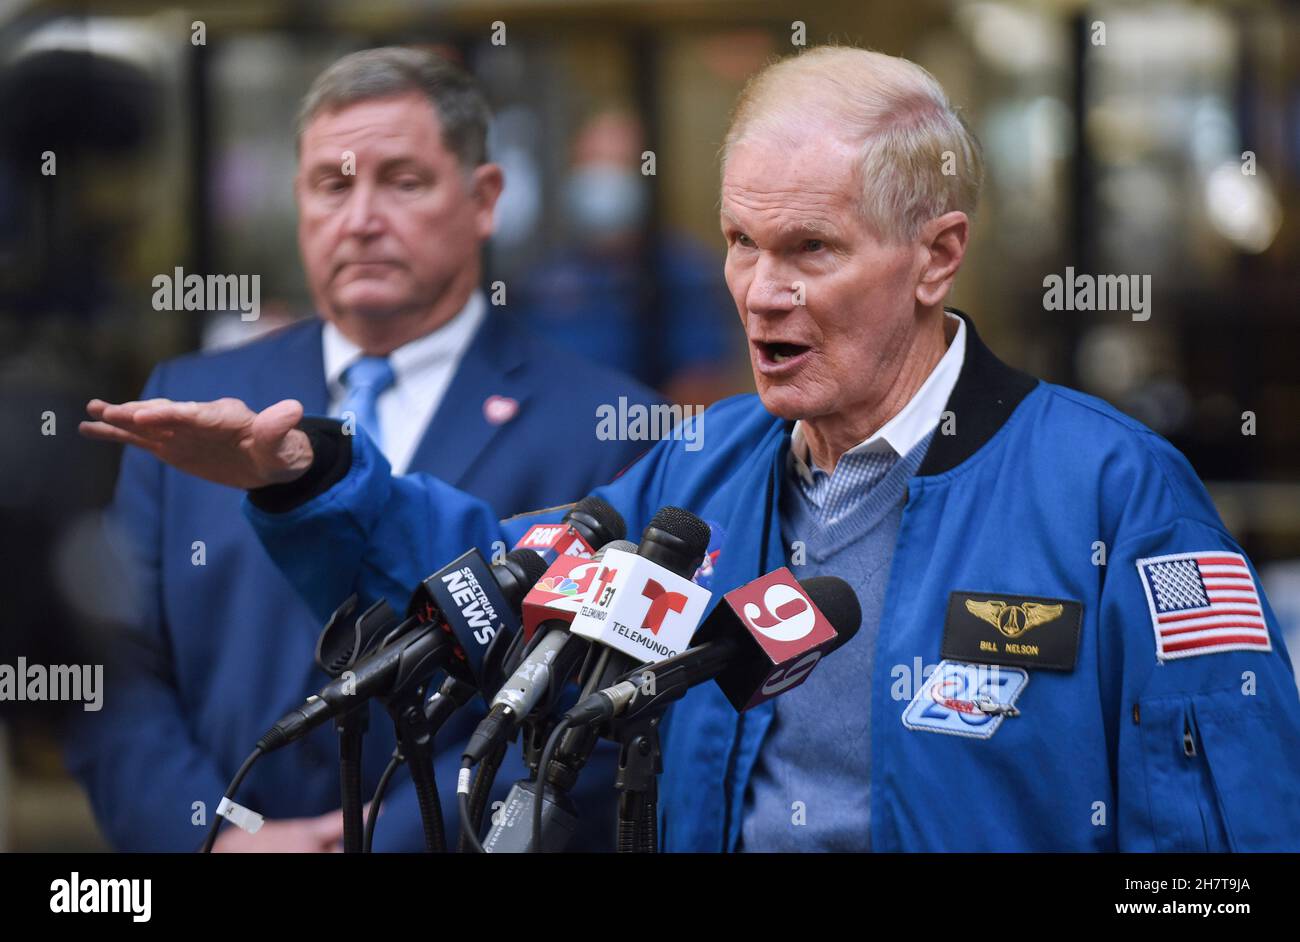 NASA Administrator Bill Nelson (R) delivers his speech while Orlando Aviation Authority CEO Phil Brown (L) attentively listens during a press conference of the implementation of a NASA-developed flight scheduling technology to all airports across the country in 2023.The Airspace Technology Demonstration 2 (ATD-2) system was transferred to the Federal Aviation Administration (FAA) in September. This technology will allow planes to roll directly to the runway for takeoff to avoid excessive taxi-out time and hold time thereby reducing fuel use, emissions, and passenger delays. (Photo by Paul Henn Stock Photo